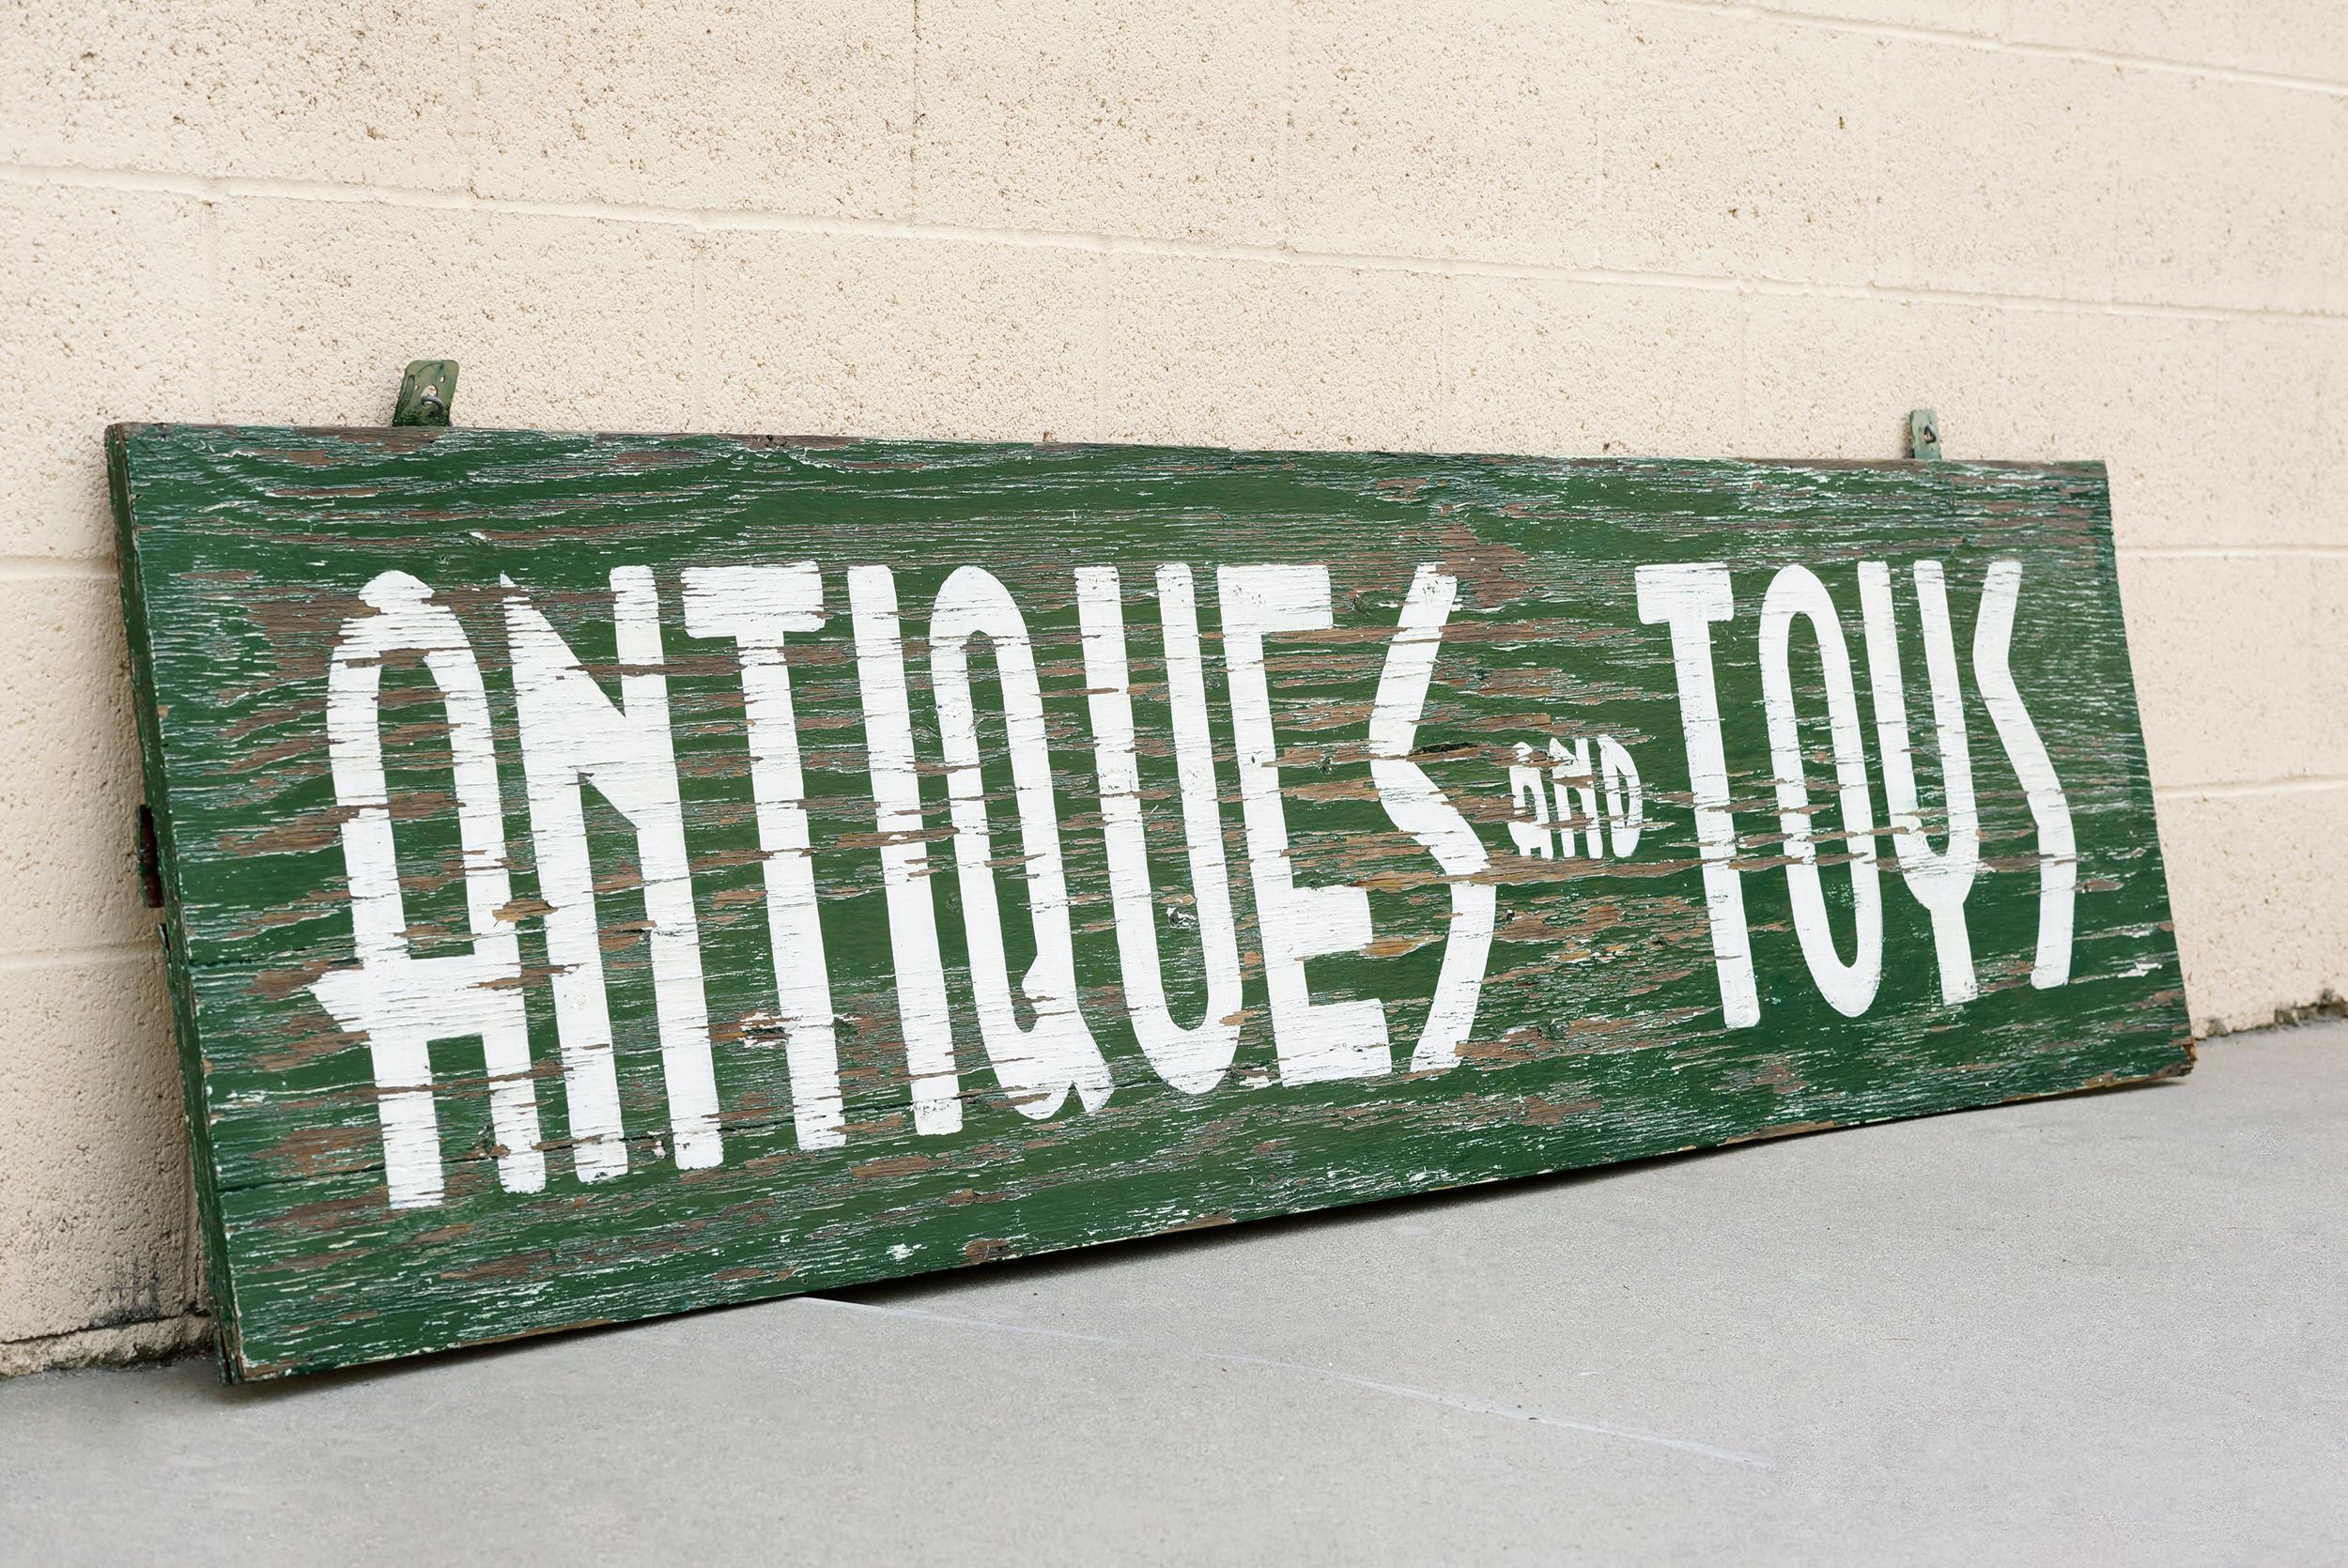 Extra large hand-painted storefront signage reclaimed from beloved 